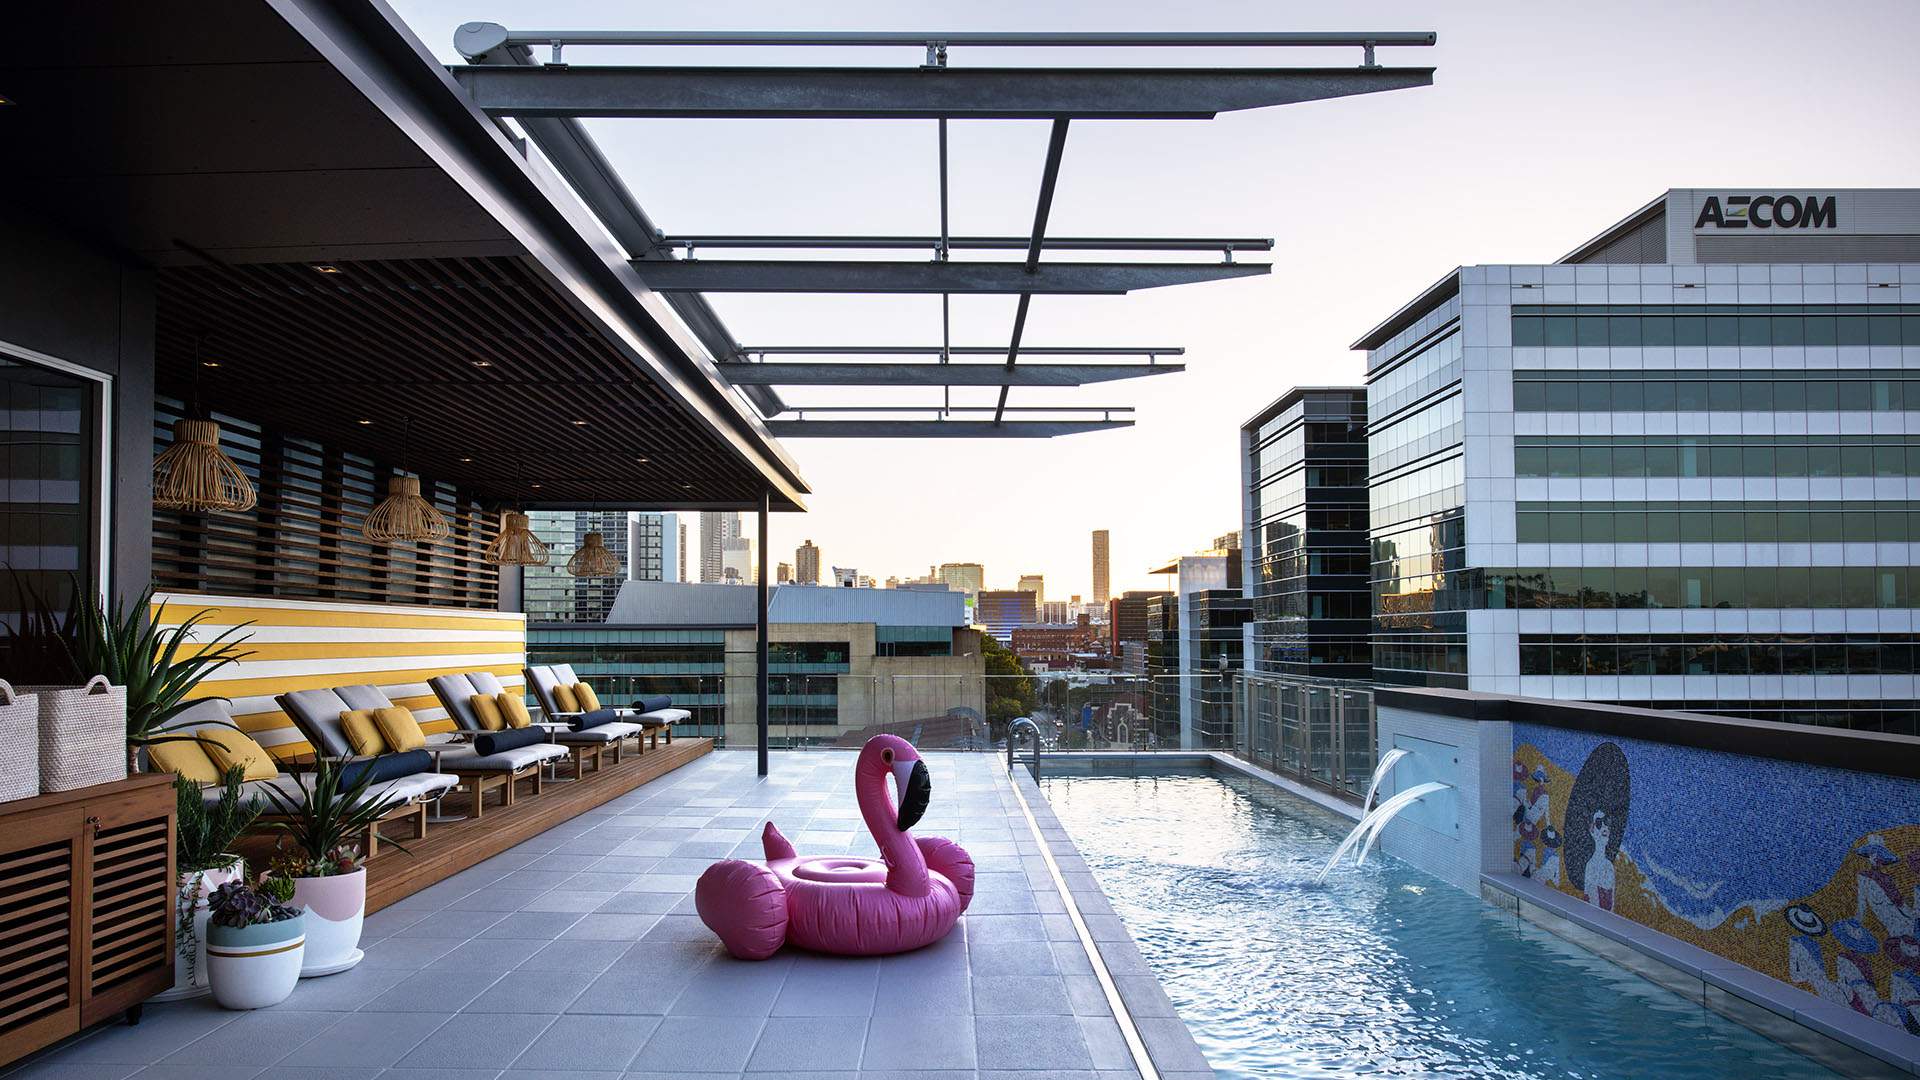 Luxe New Brisbane Hotel Ovolo The Valley Has Just Opened Its Rockstar-Inspired Doors